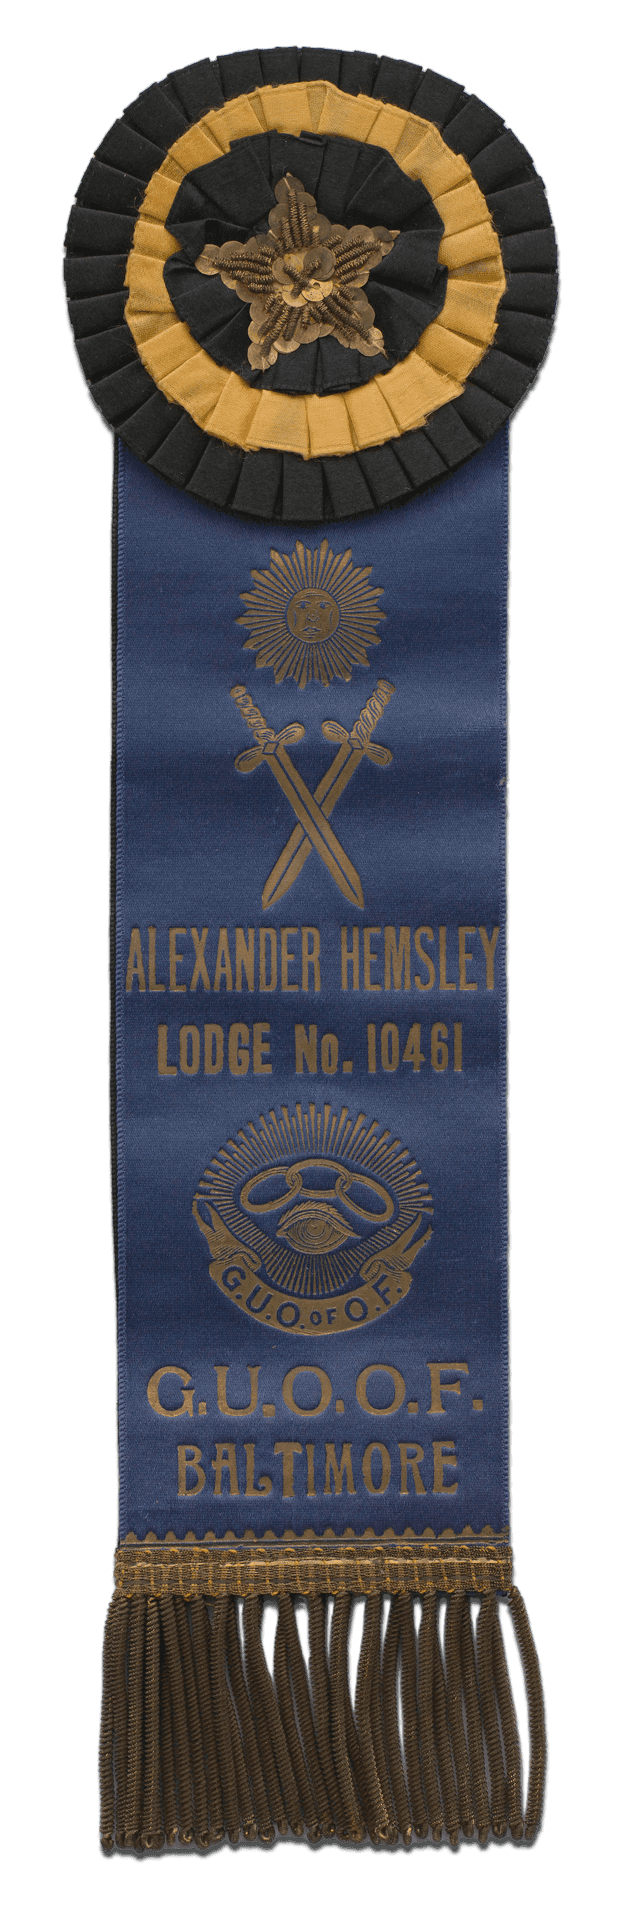 A blue ribbon with a black and gold star for Alexander Hemsley Lodge No. 10461. It has a fridged bottom.